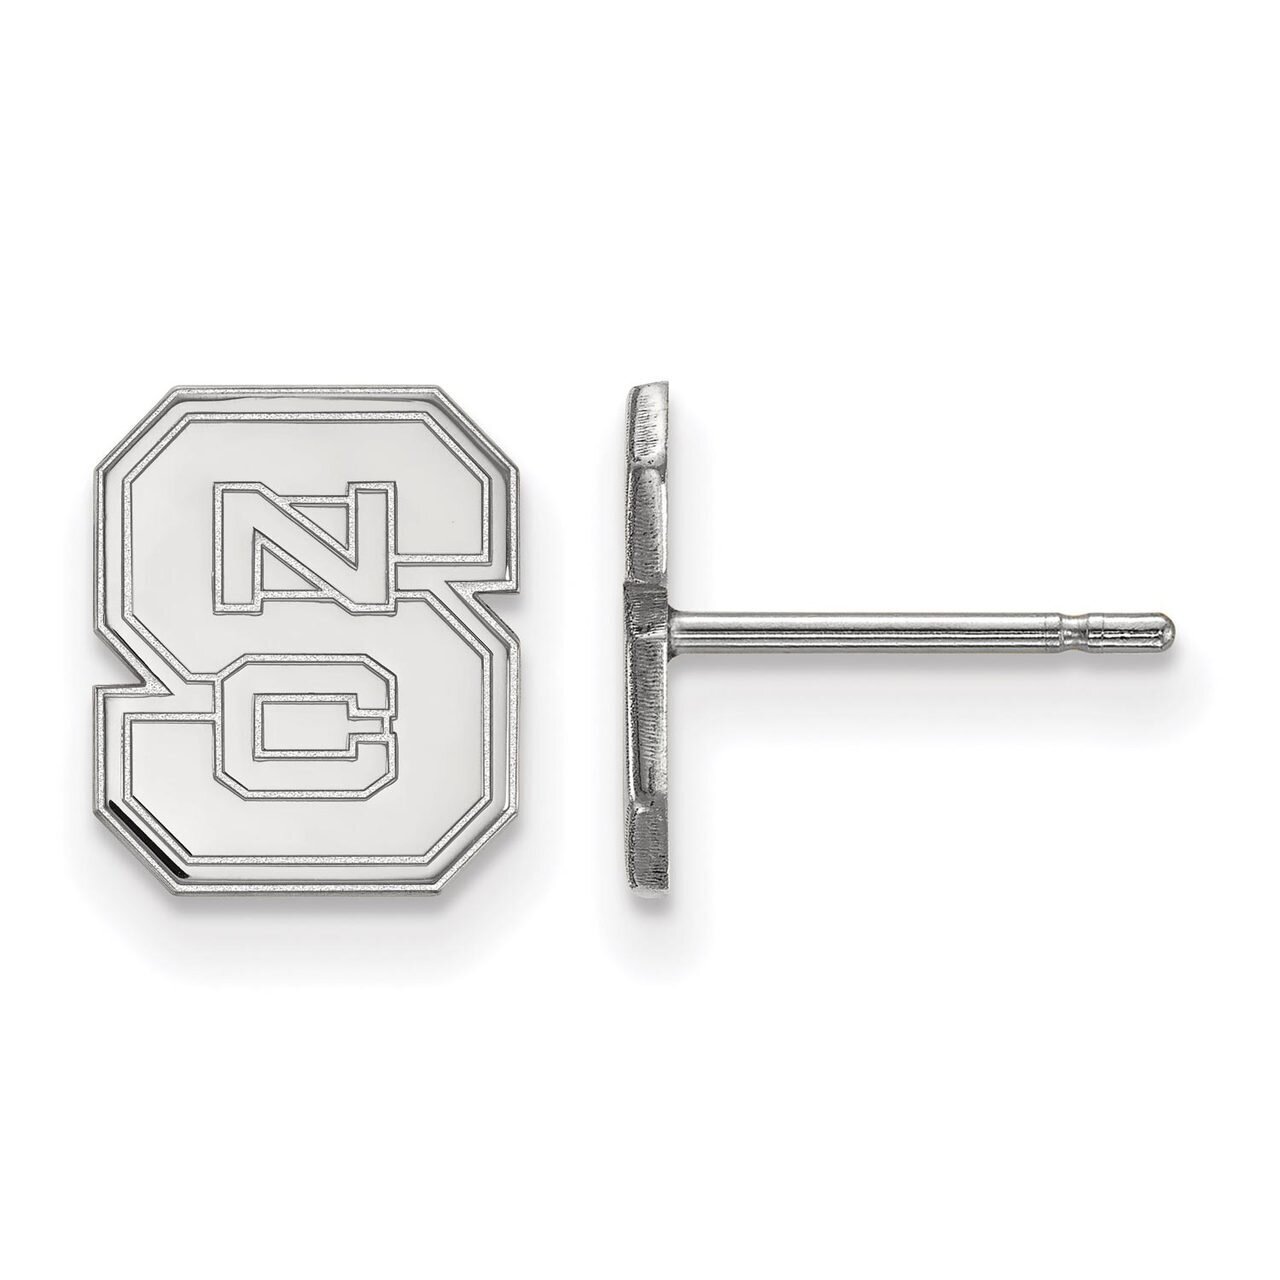 North Carolina State University Extra Small Post Earring Sterling Silver SS008NCS